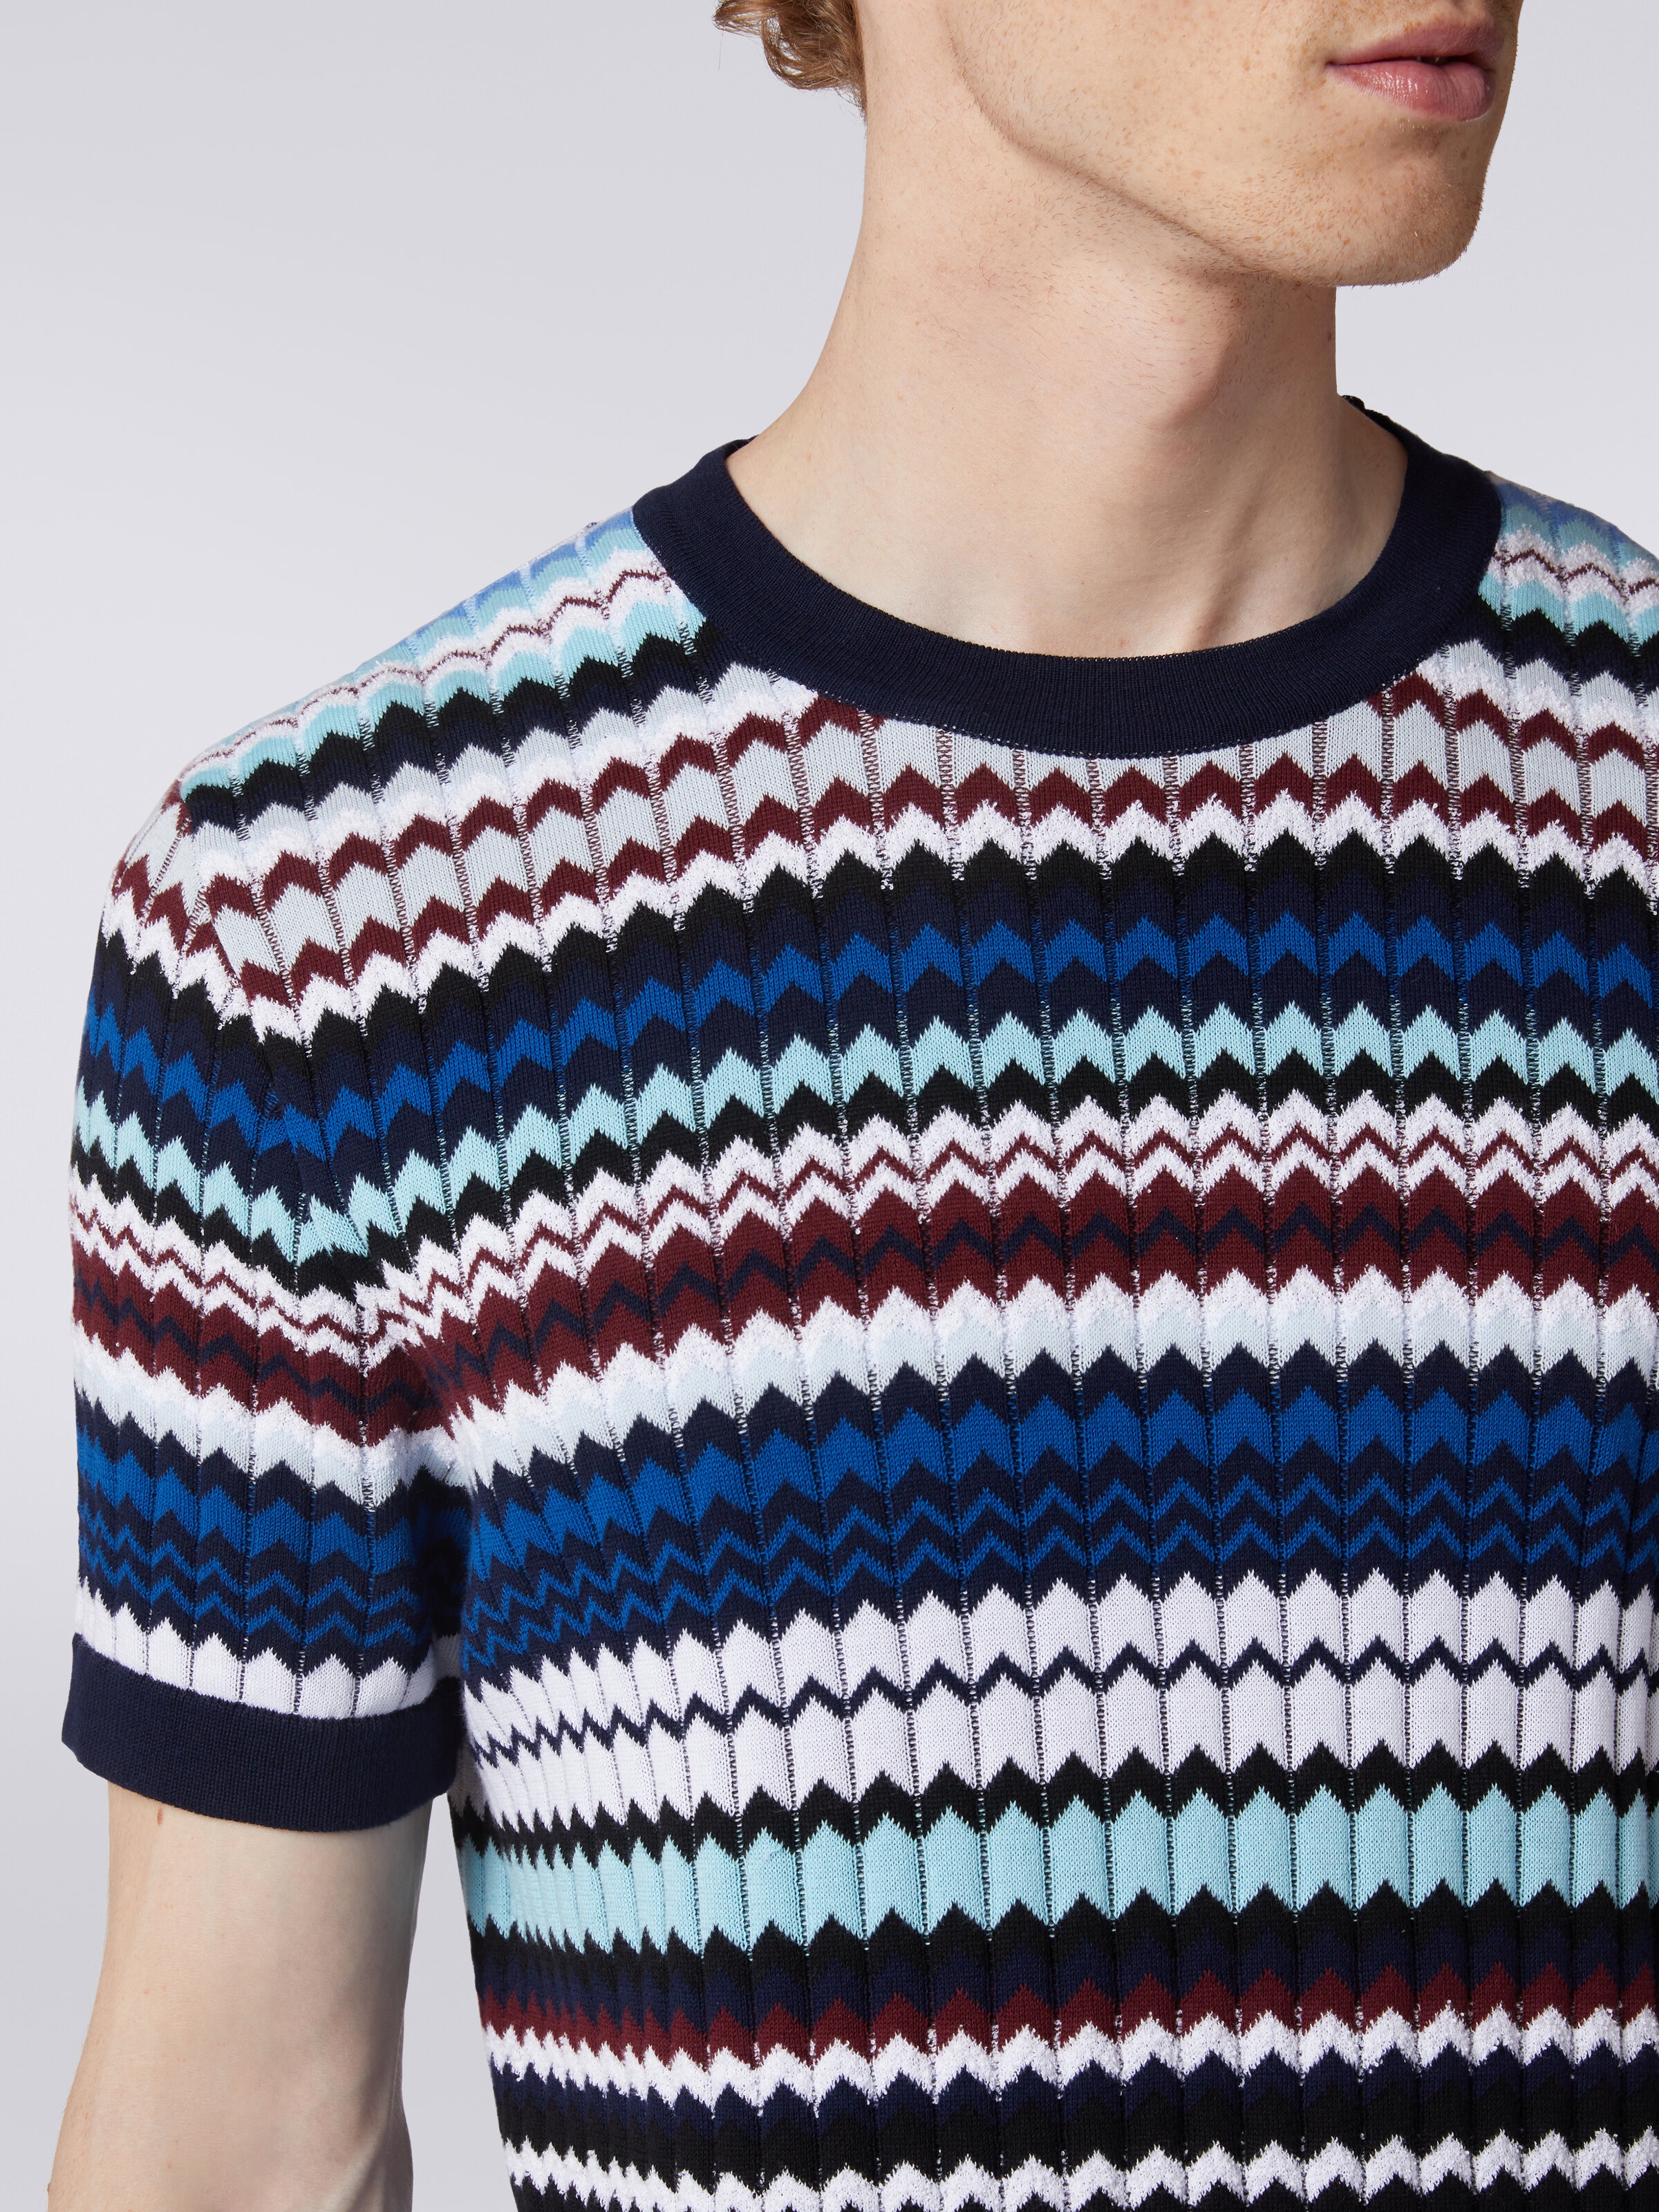 T-shirt in ribbed zigzag cotton knit, Multicoloured  - 4